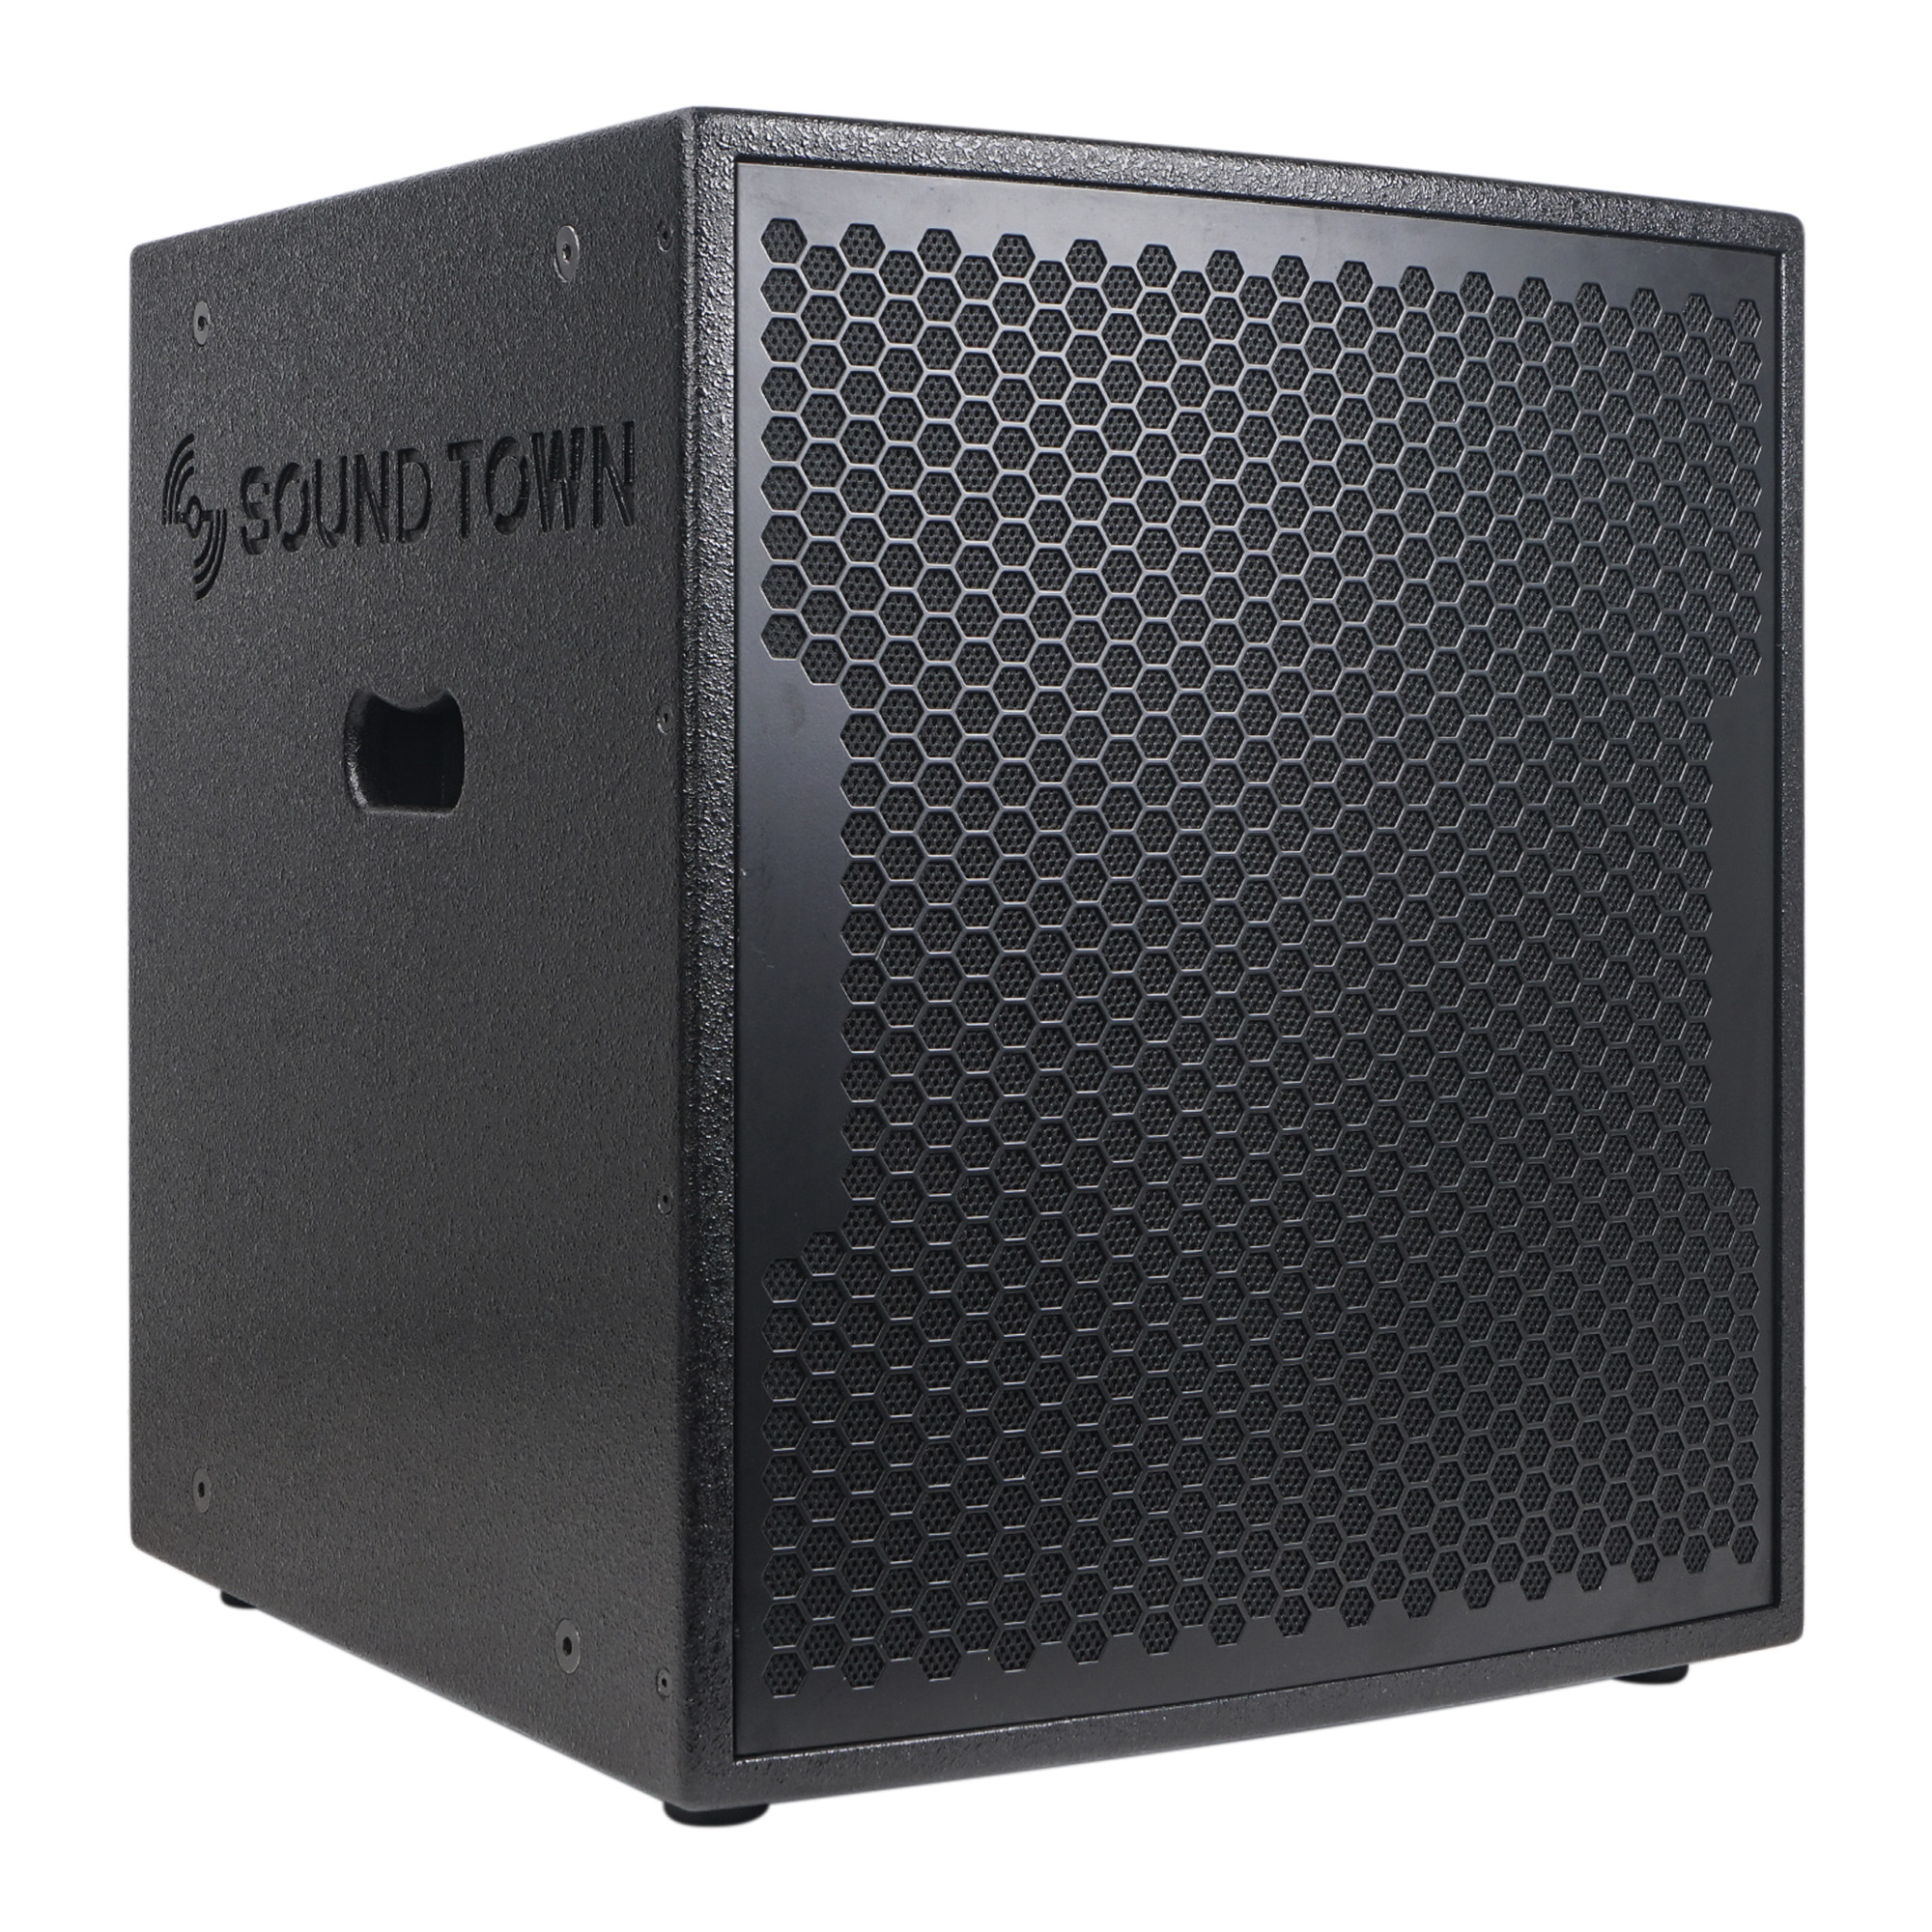 Sound Town Line Array Speaker System with One 18" Powered Subwoofer w/DSP and Speaker Output, Two 6 x 3 Line Array Speakers, Black (CARME-18M3) - image 5 of 9